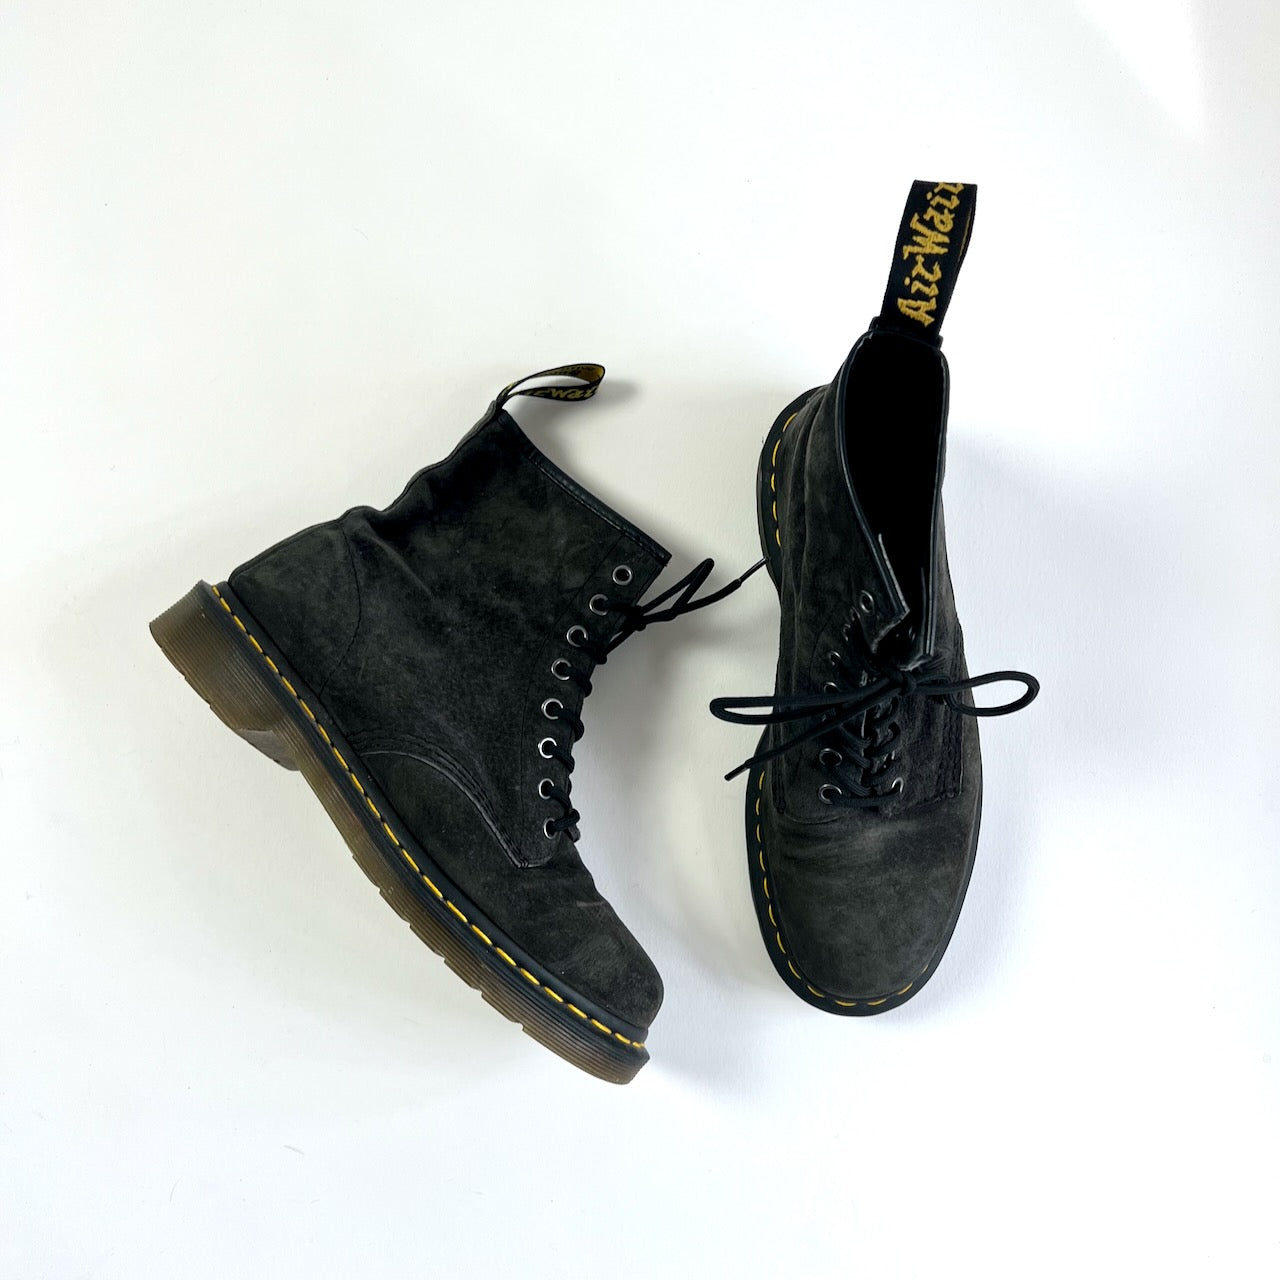 Dr Martens charcoal suede lace up boots